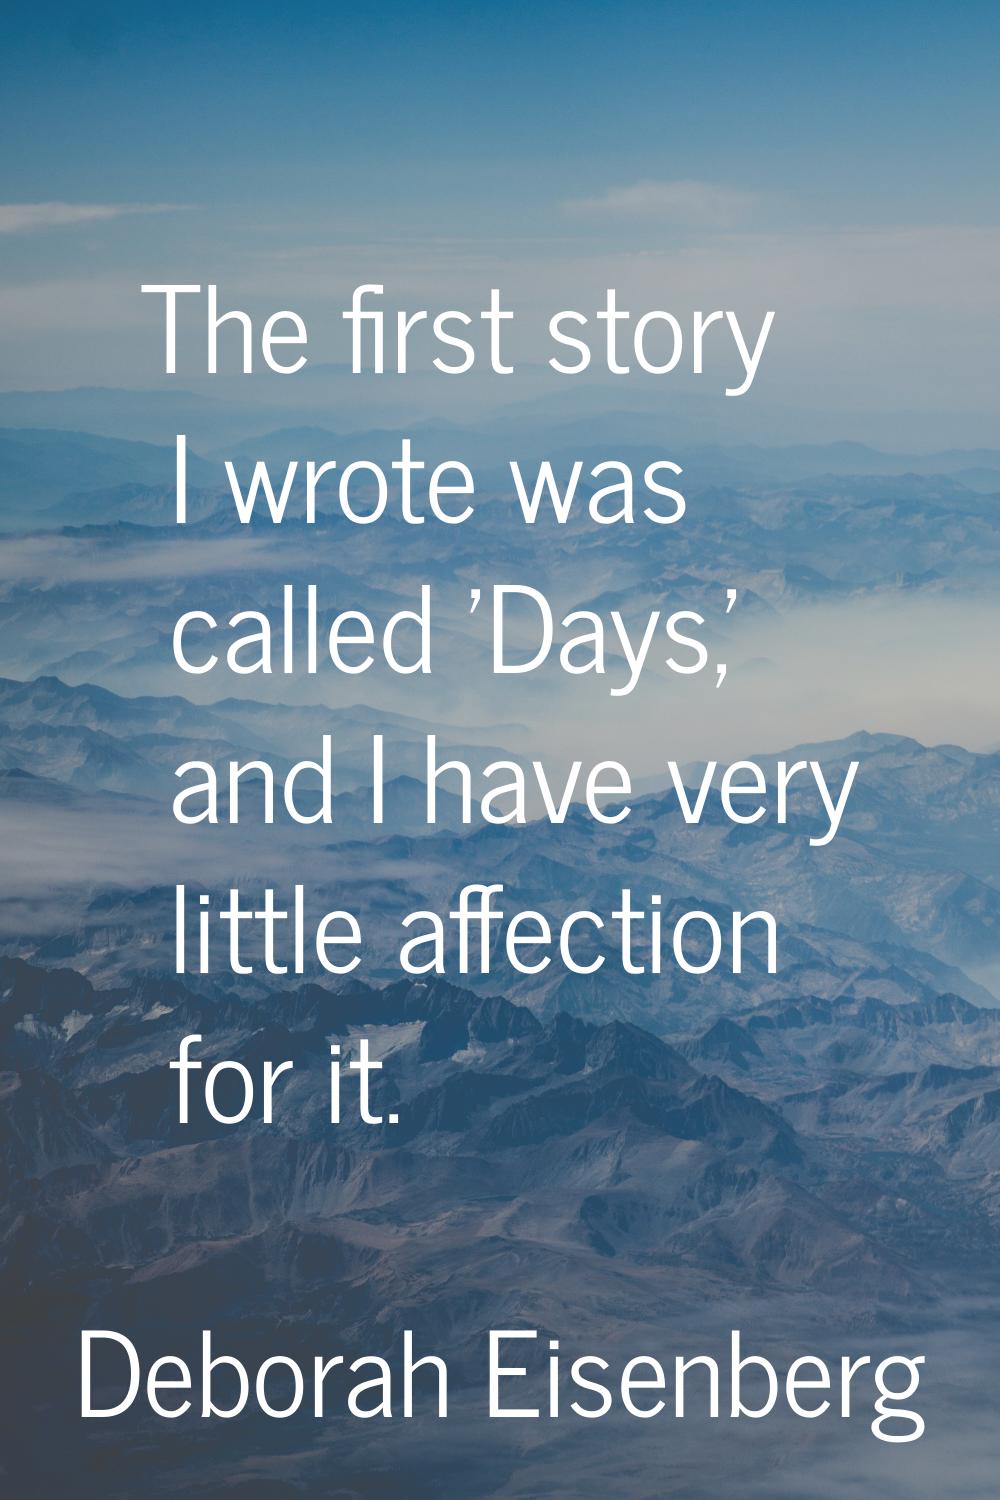 The first story I wrote was called 'Days,' and I have very little affection for it.